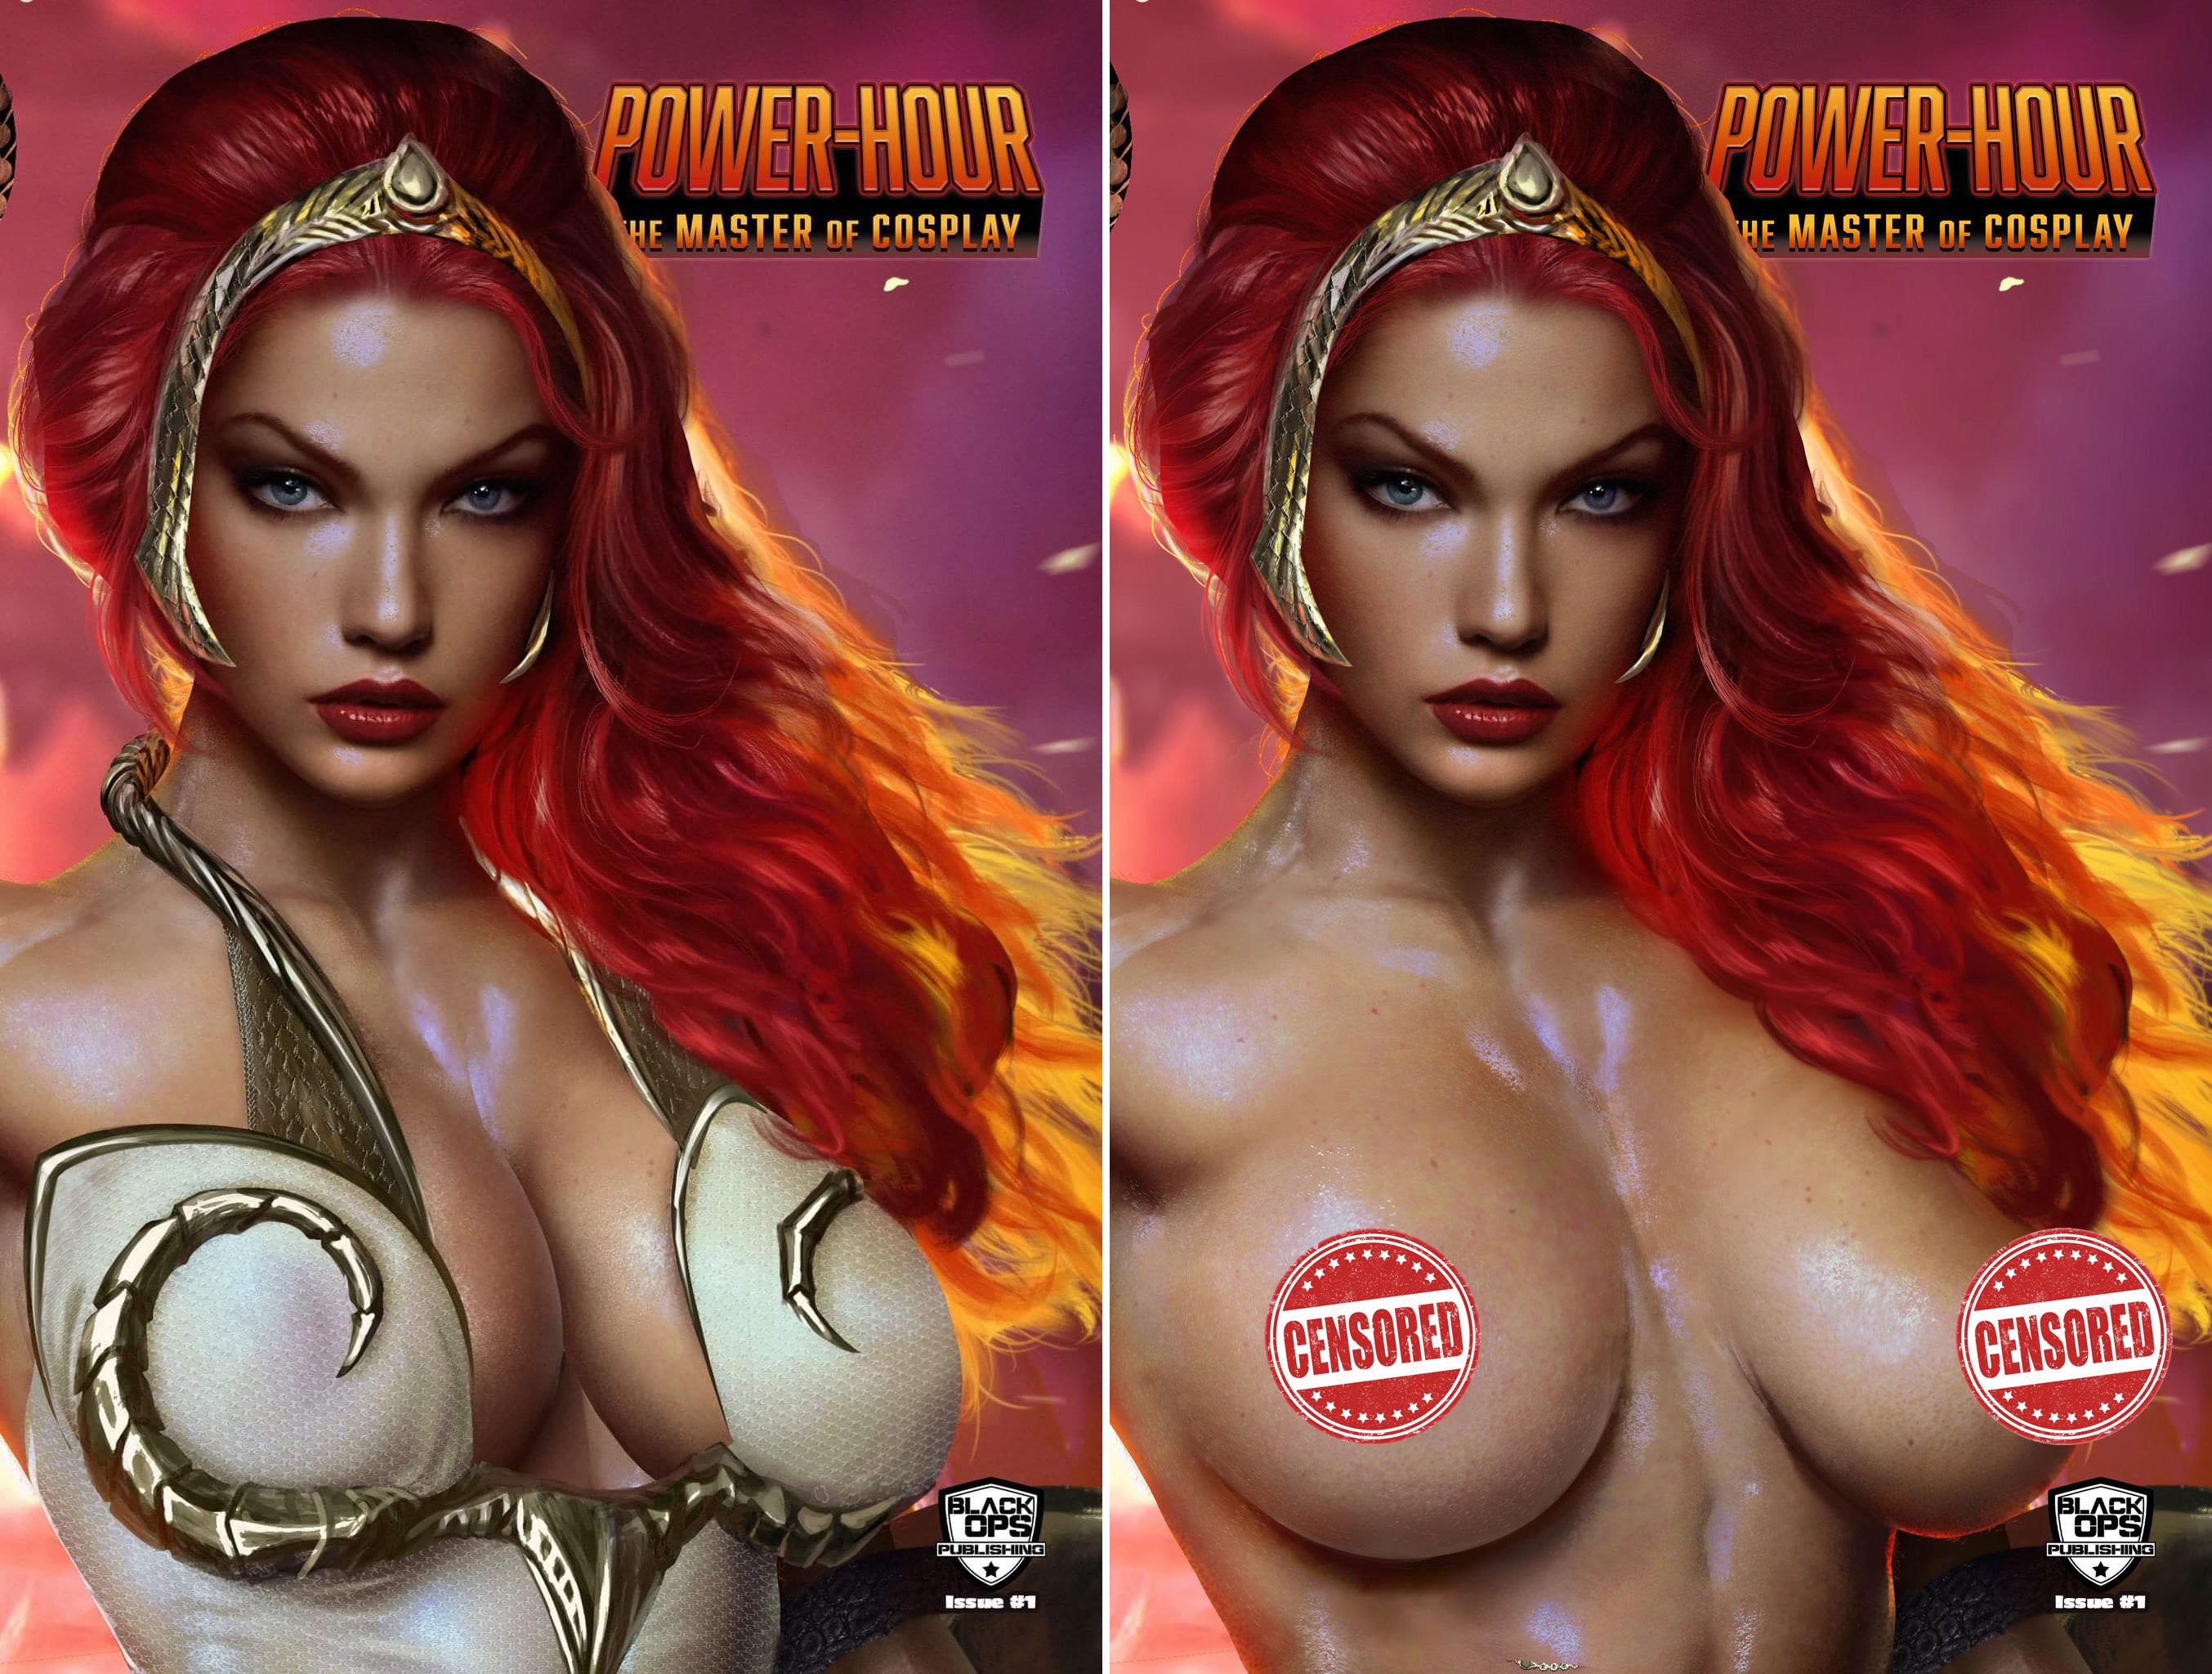 POWER HOUR THE MASTER OF COSPLAY EXCLUSIVE PREVIEW OPTIONS LIMITED TO 200